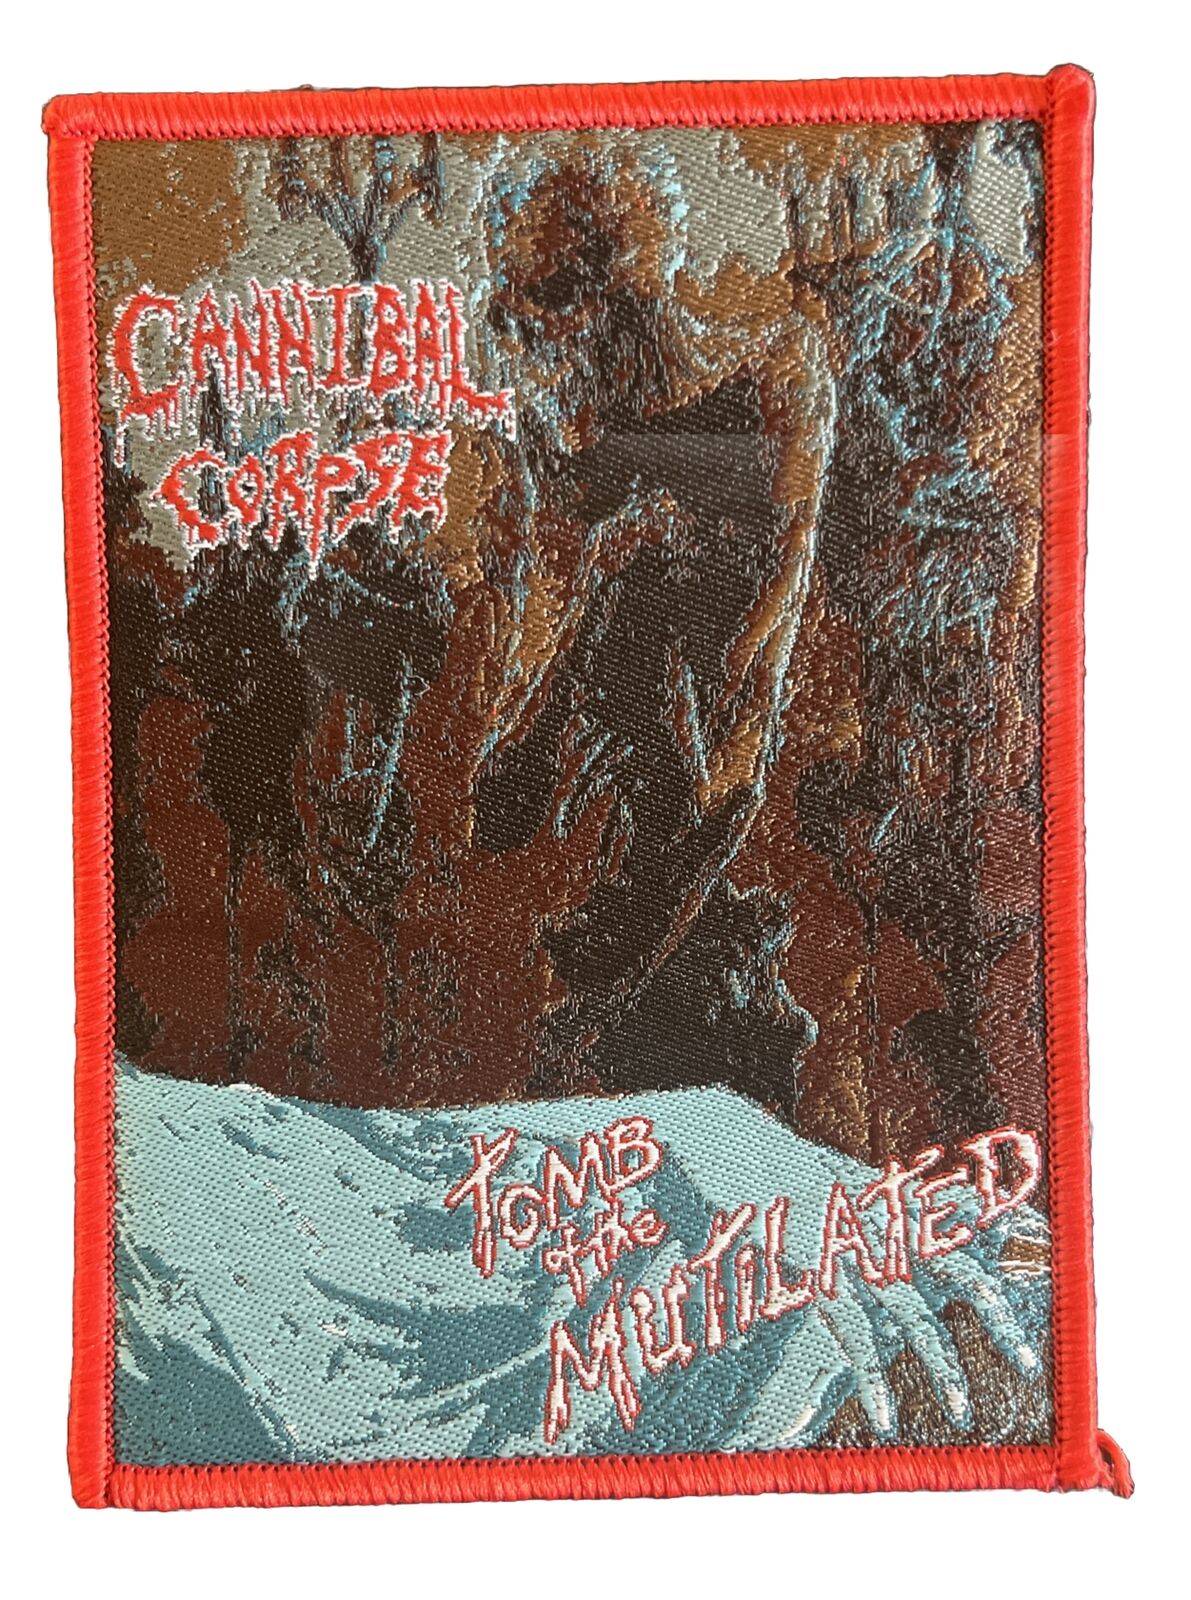 Cannibal Corpse - Tomb of the Mutilated (Red)